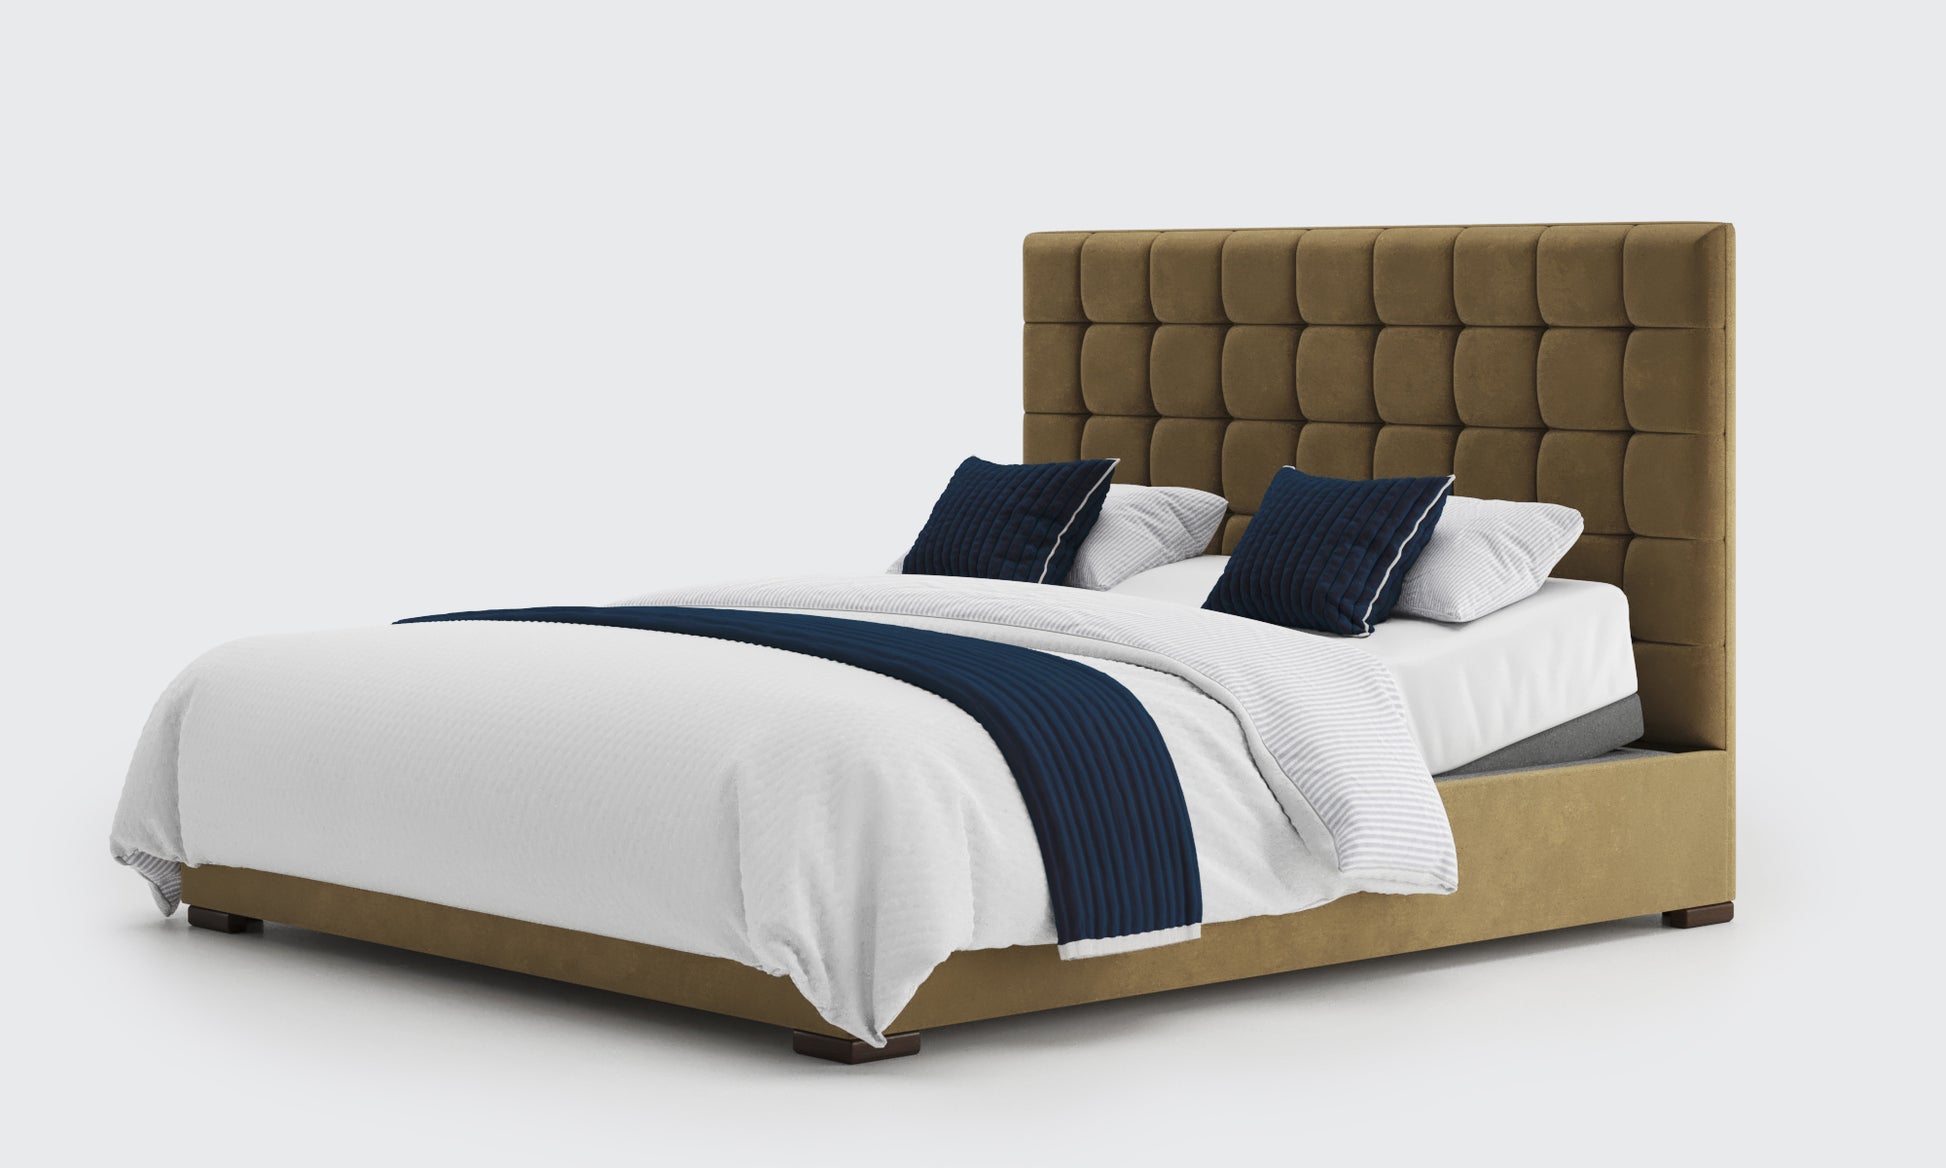 stratton 6ft double bed and mattress in the biscuit velvet material